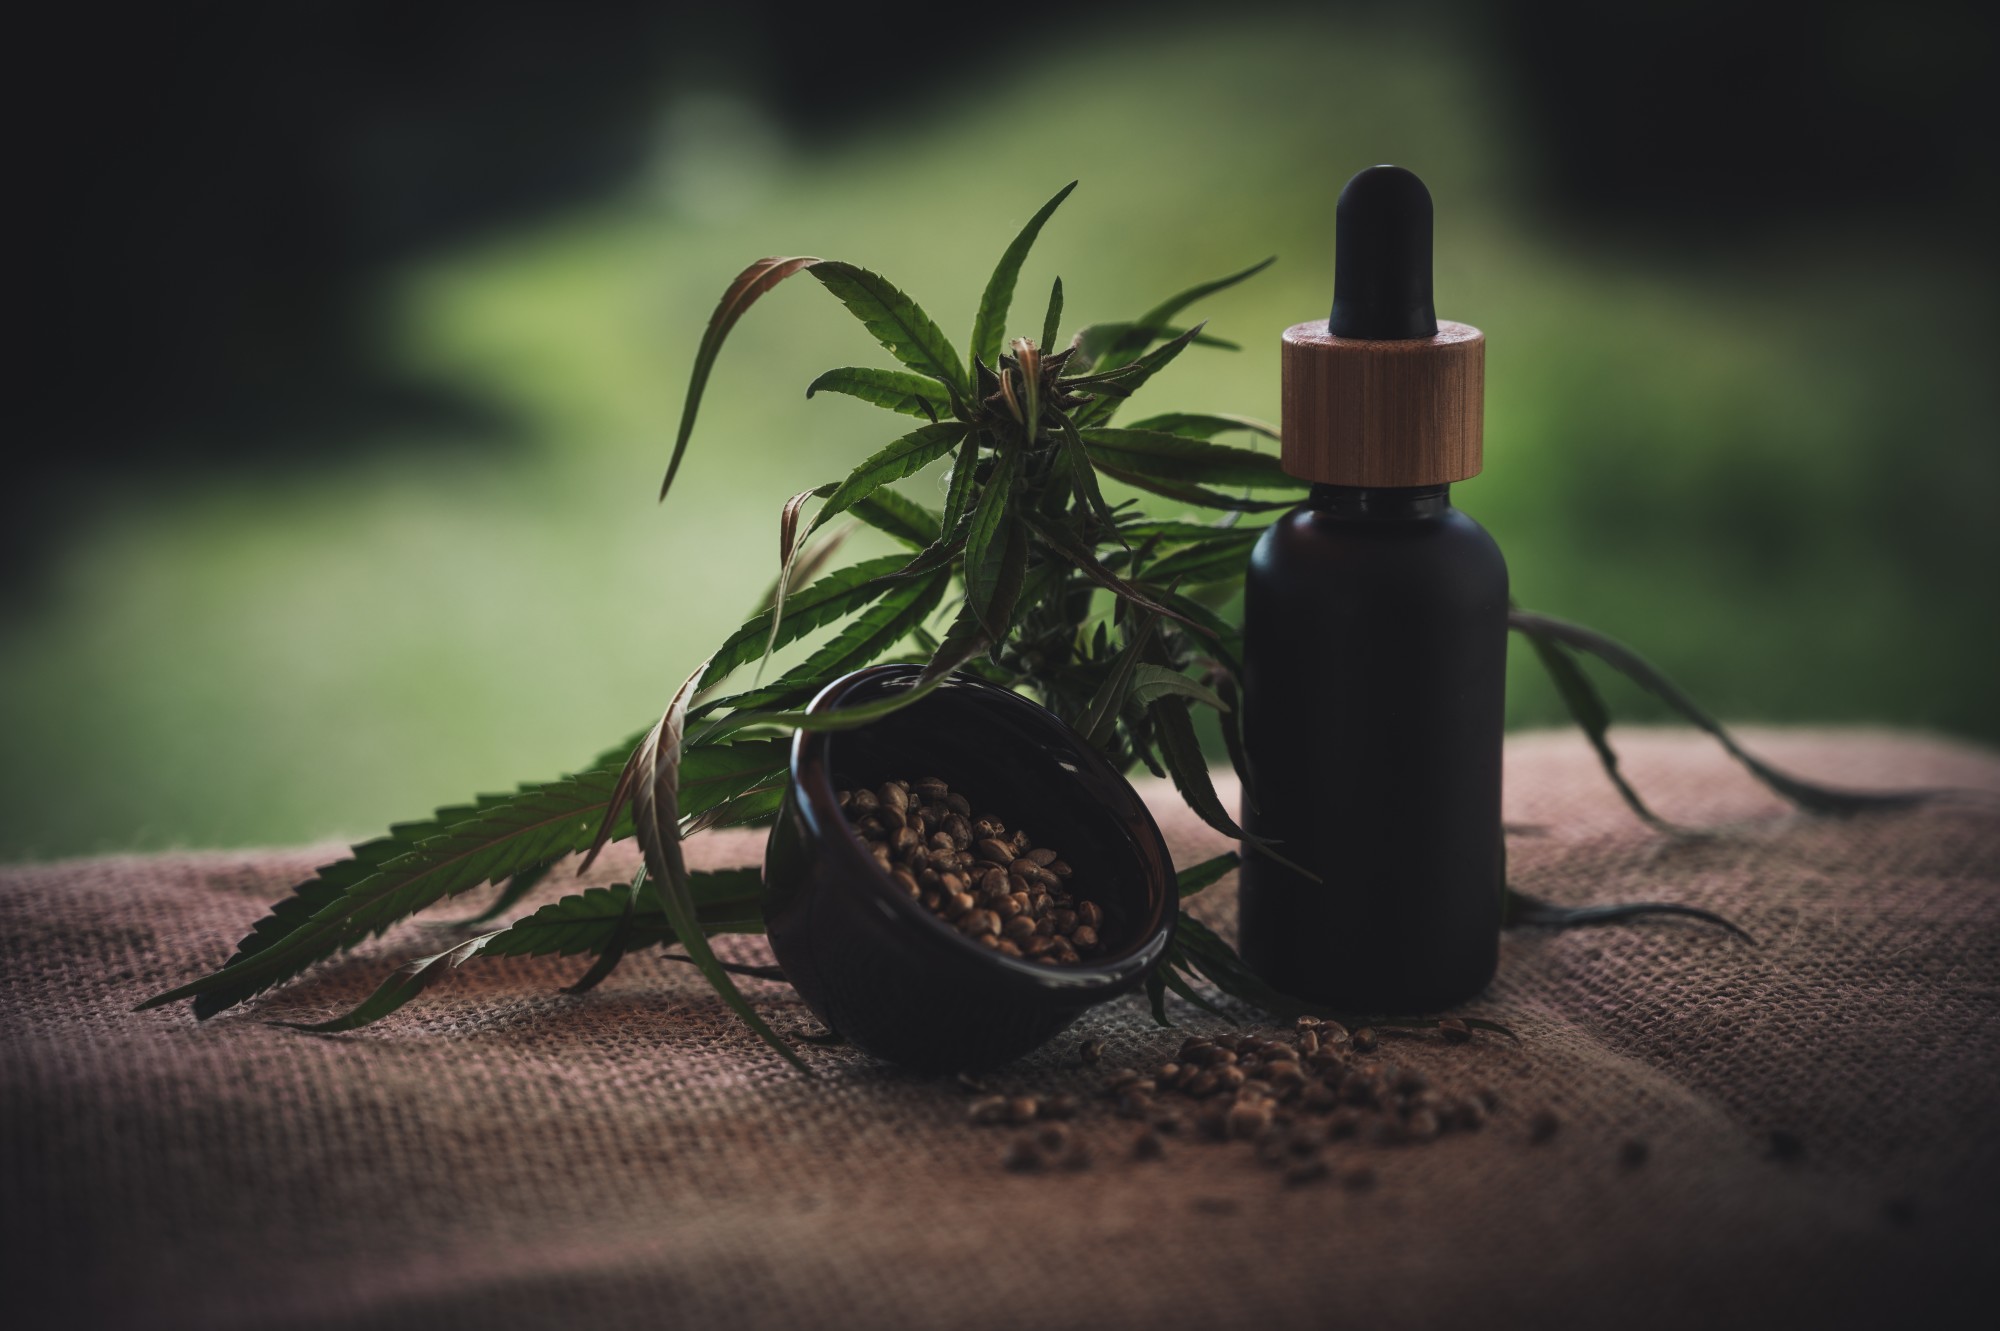 Are you wondering what CBD biomass is? Click here for the ultimate guide to CBD biomass and learn how you can use it and its benefits.